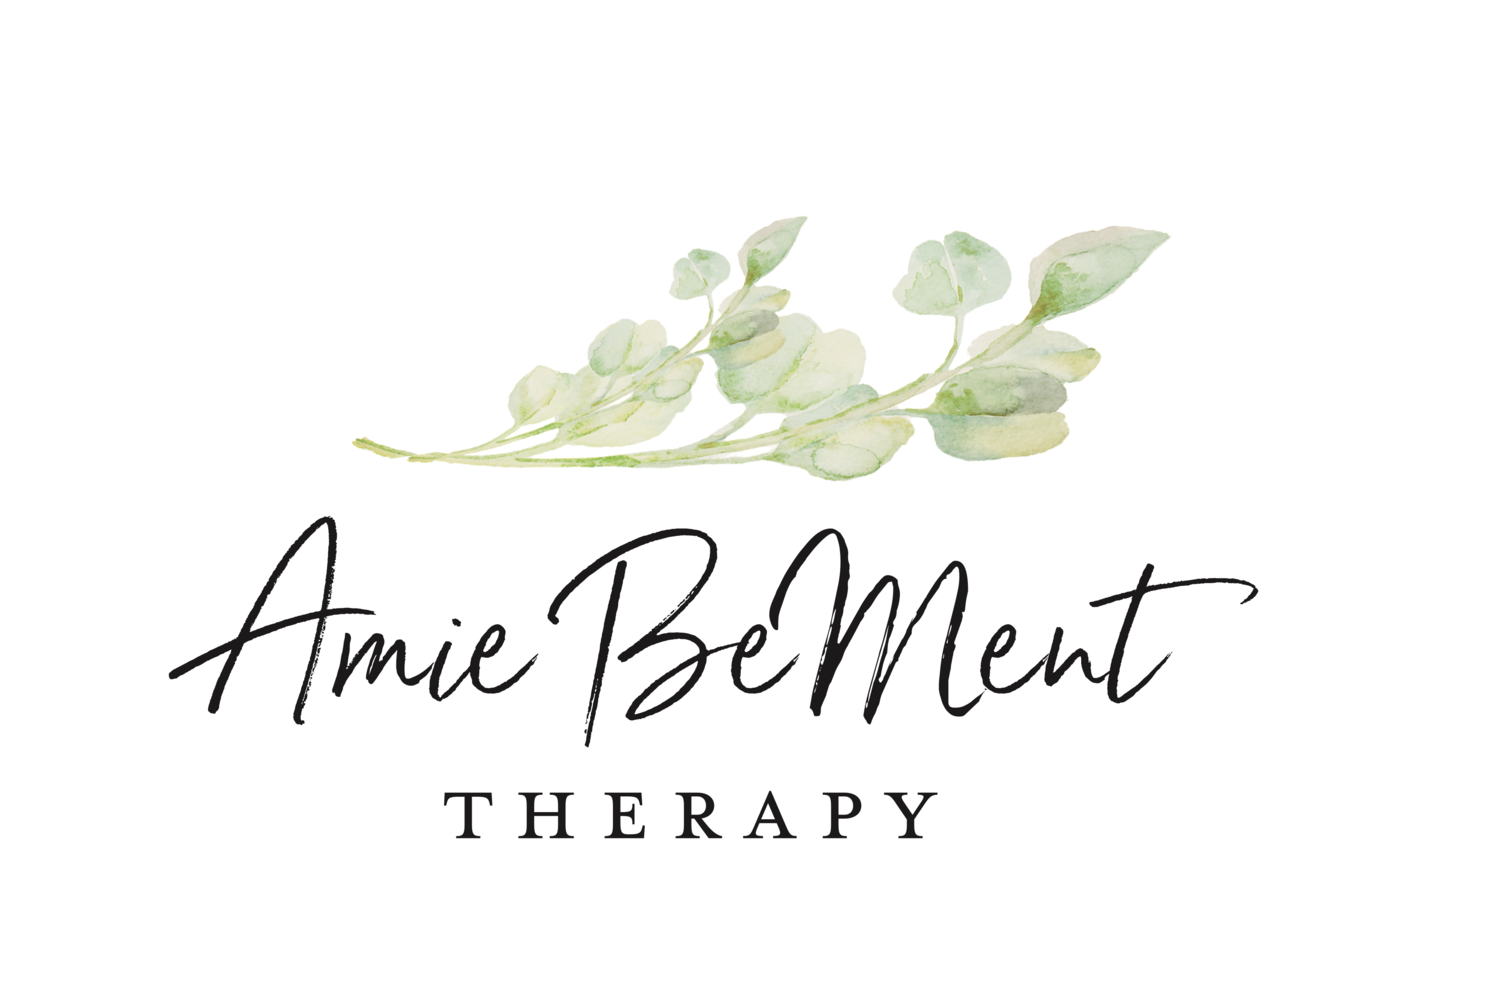 Amie BeMent Therapy